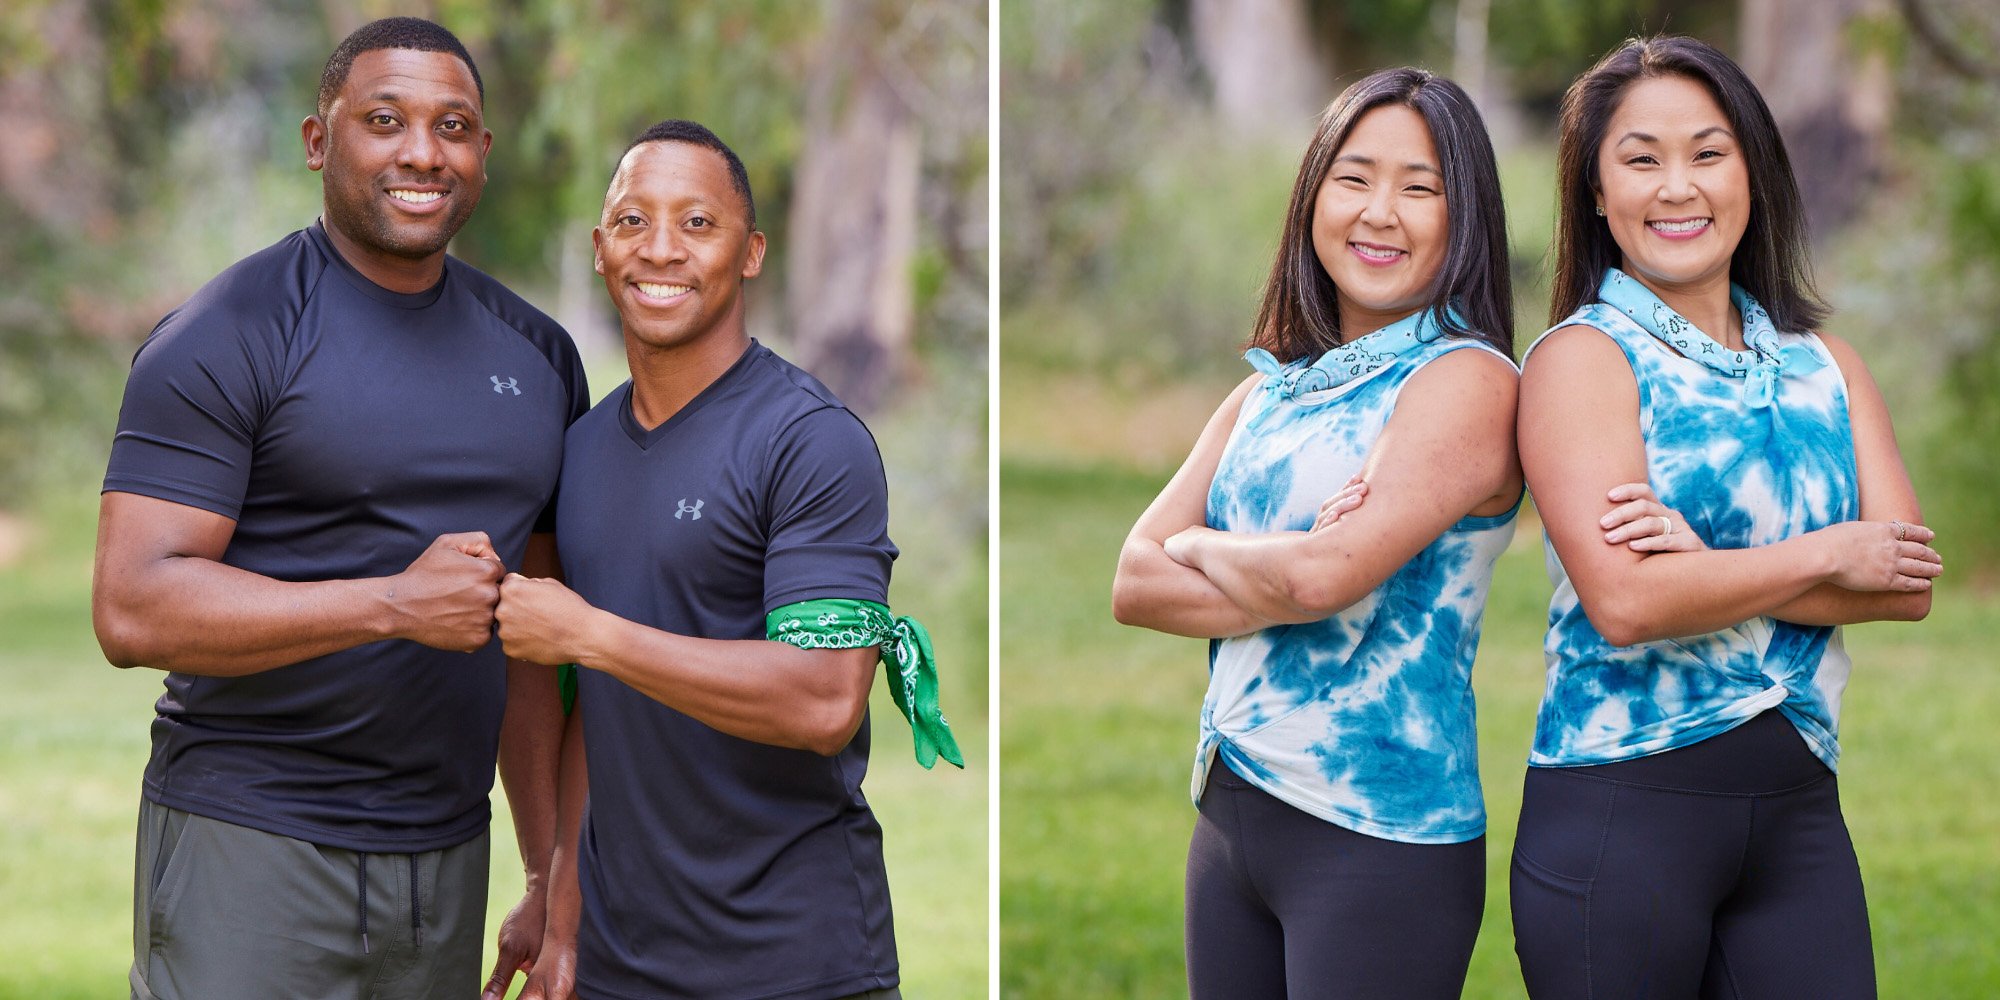 The Amazing Race Season 34 teams, left: Marcus and Michael Craig bump fists and smile at the camera together. Right: Emily Bushnell and Molly Sinert stand back-to-back with their arms crossed and smile at the camera.